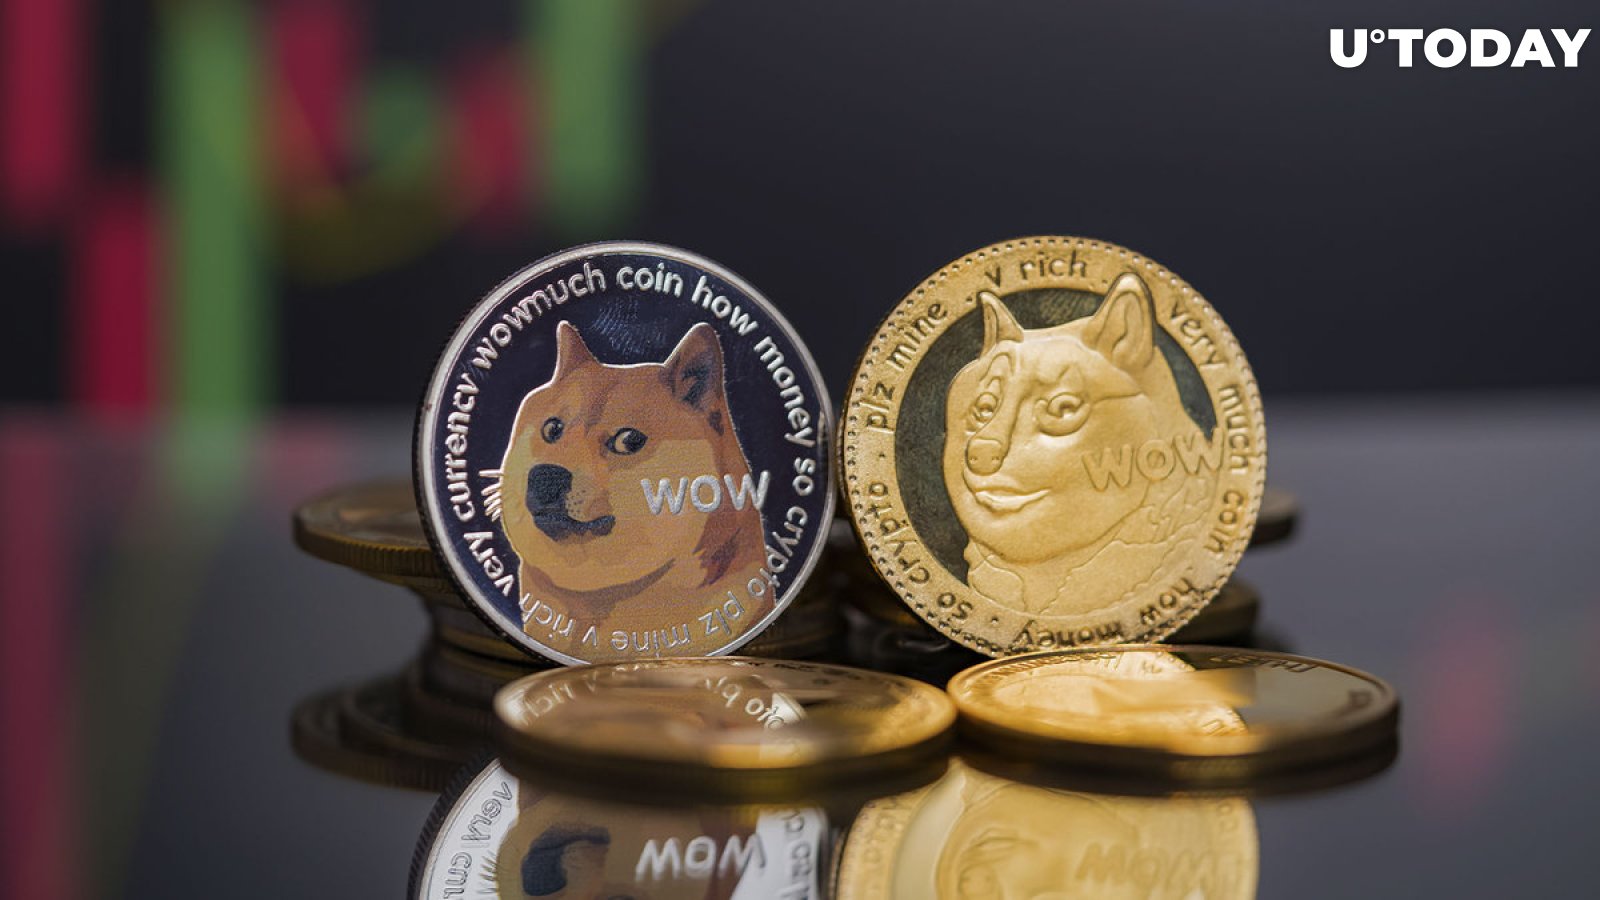 Doge Developer Profers Alternative to Expensive Mining as Dogecoin Chooses PoW